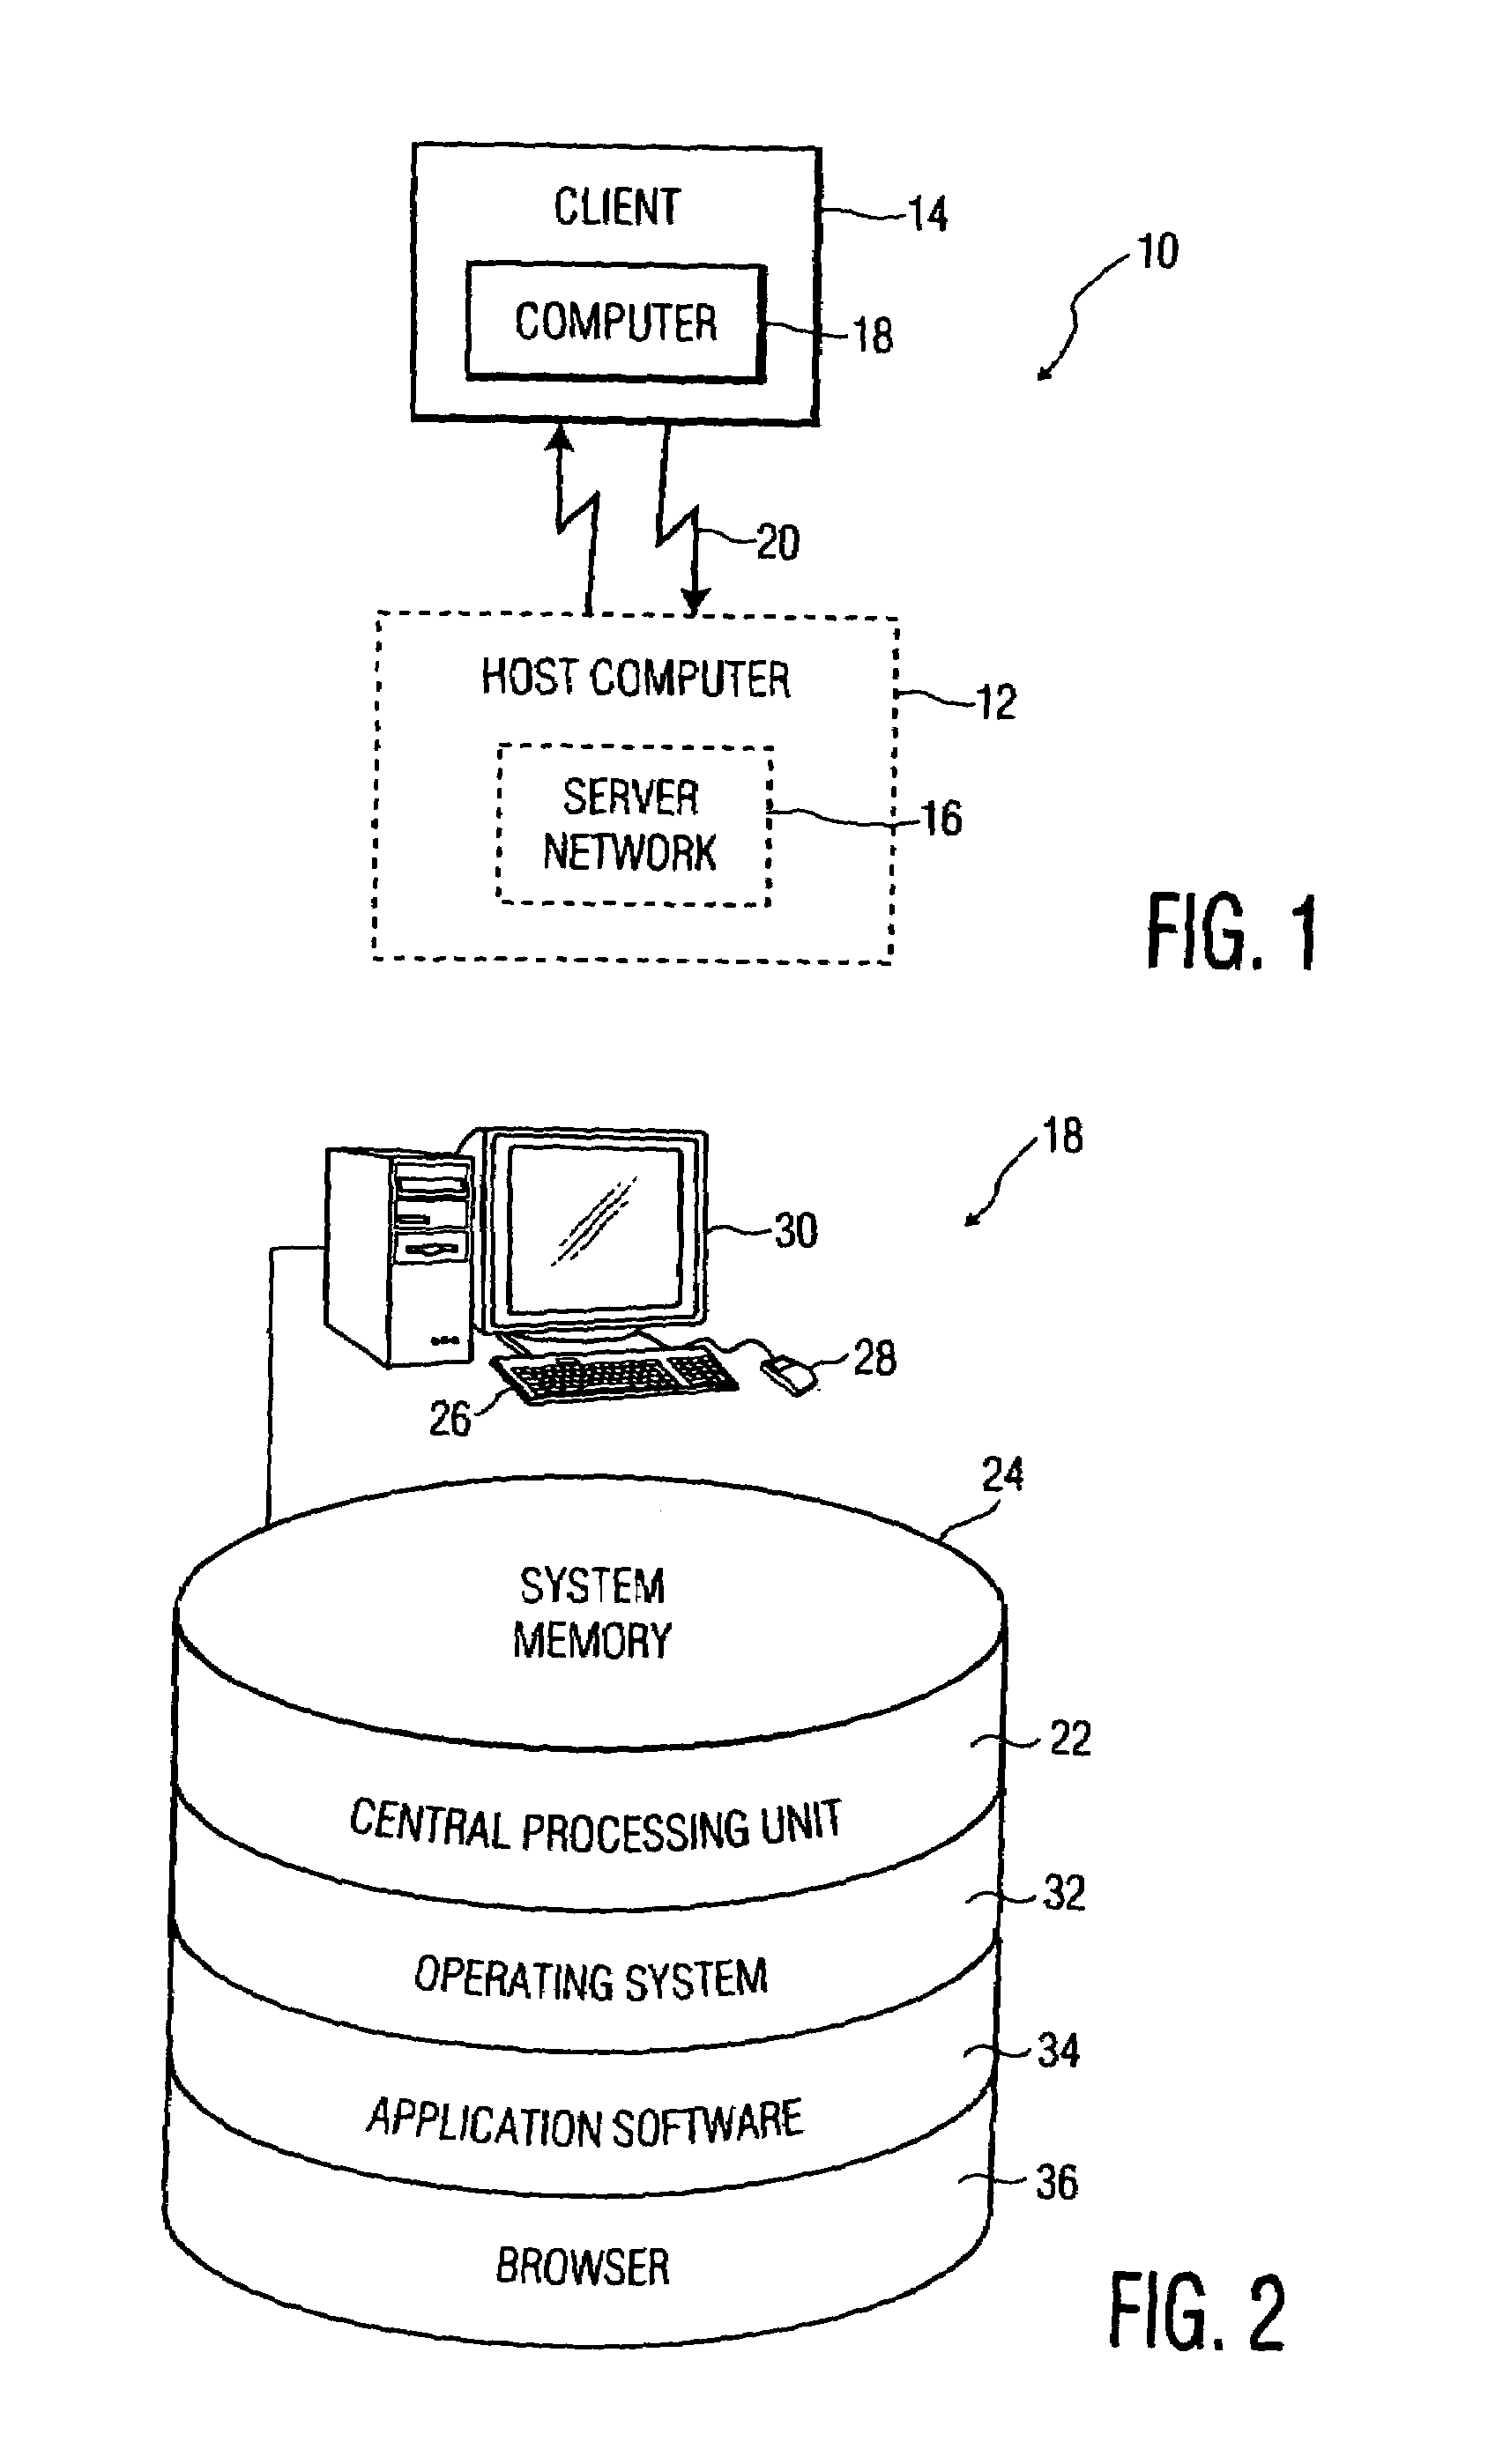 Method and system for automatically configuring a client-server network